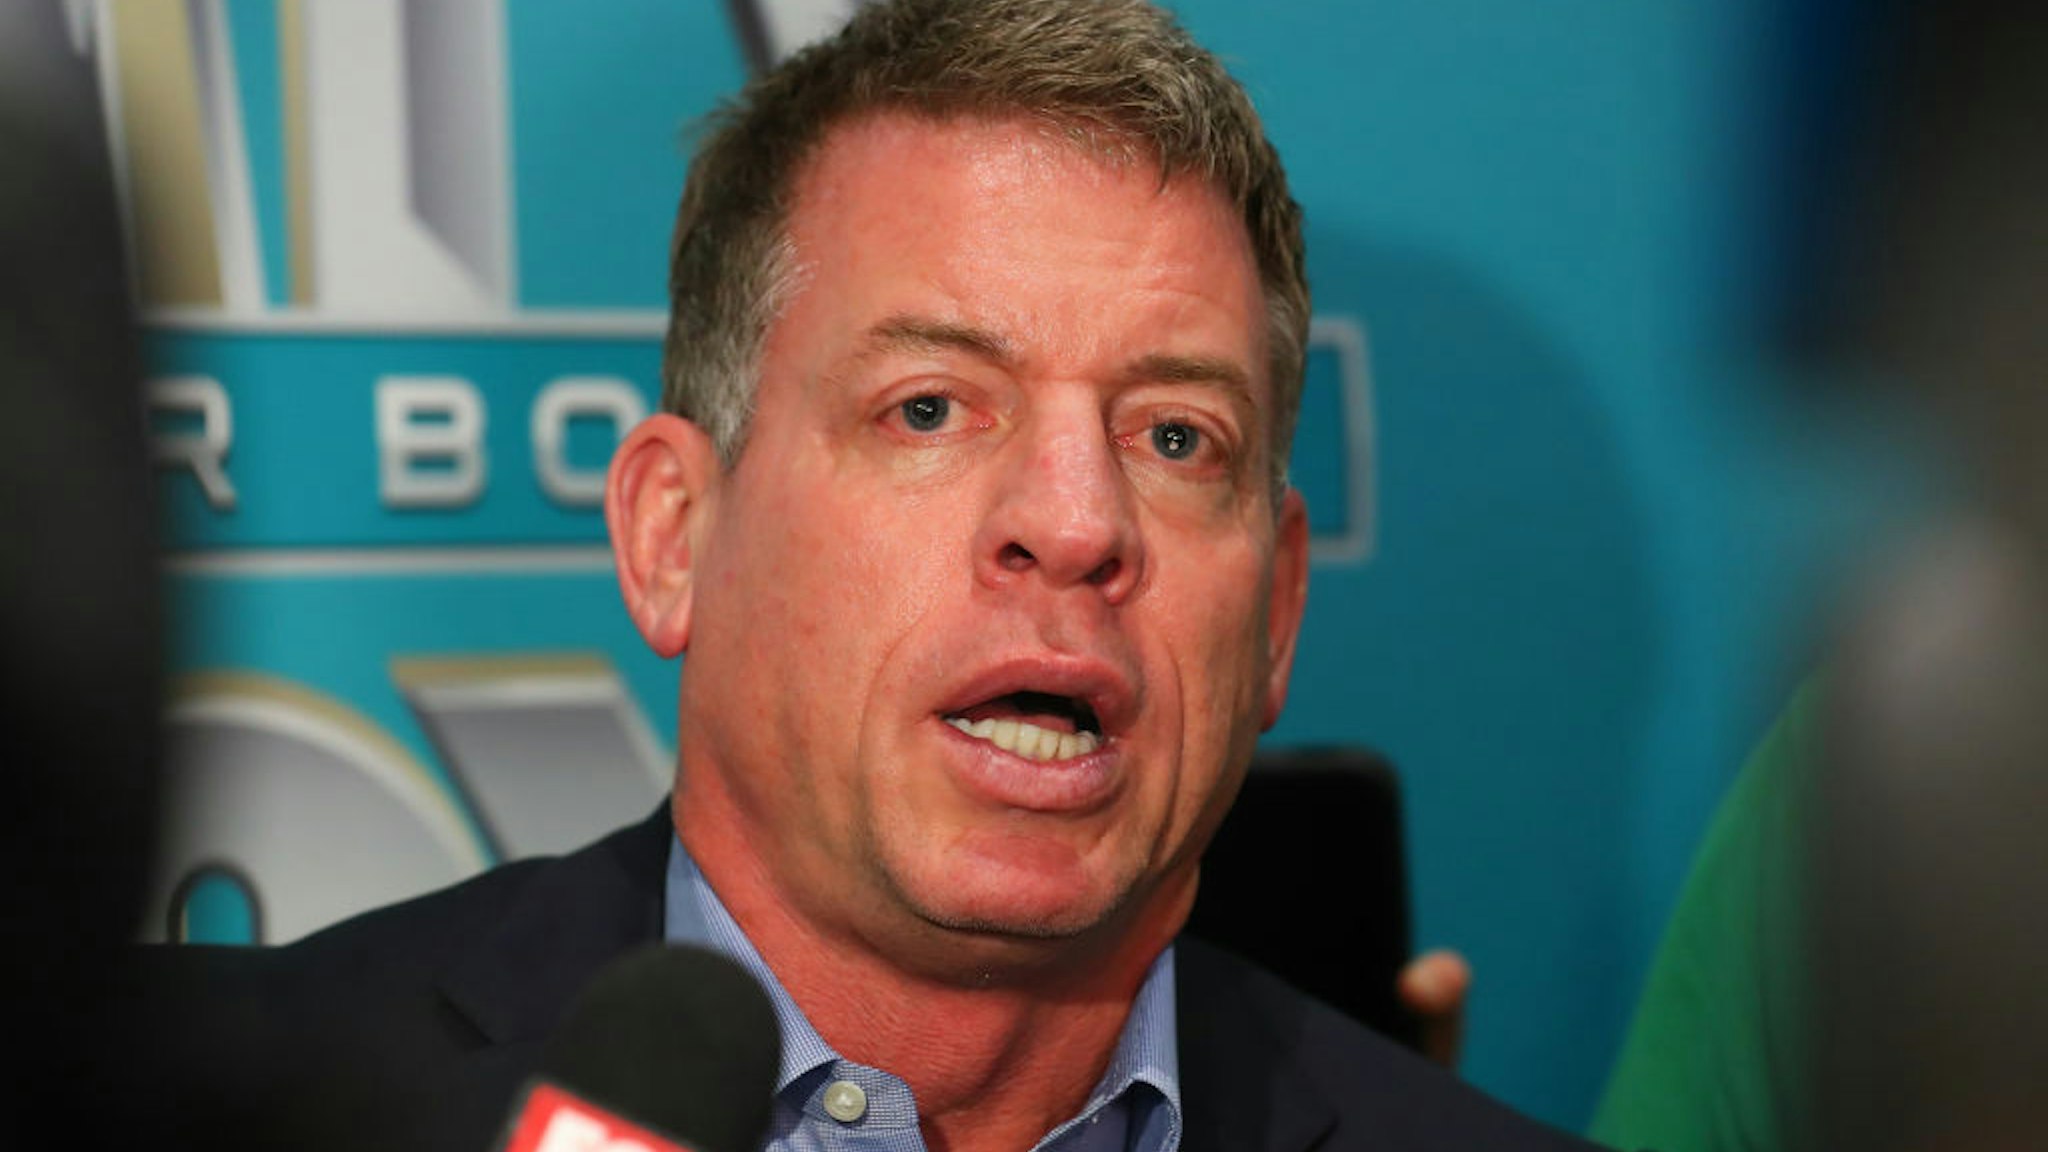 Former NFL player and Lead NFL Game Analyst Troy Aikman answers questions during the Super Bowl LIV FOX Sports Media Day on January 28, 2020 at the Miami Beach Convention Center in Miami Beach, FL.